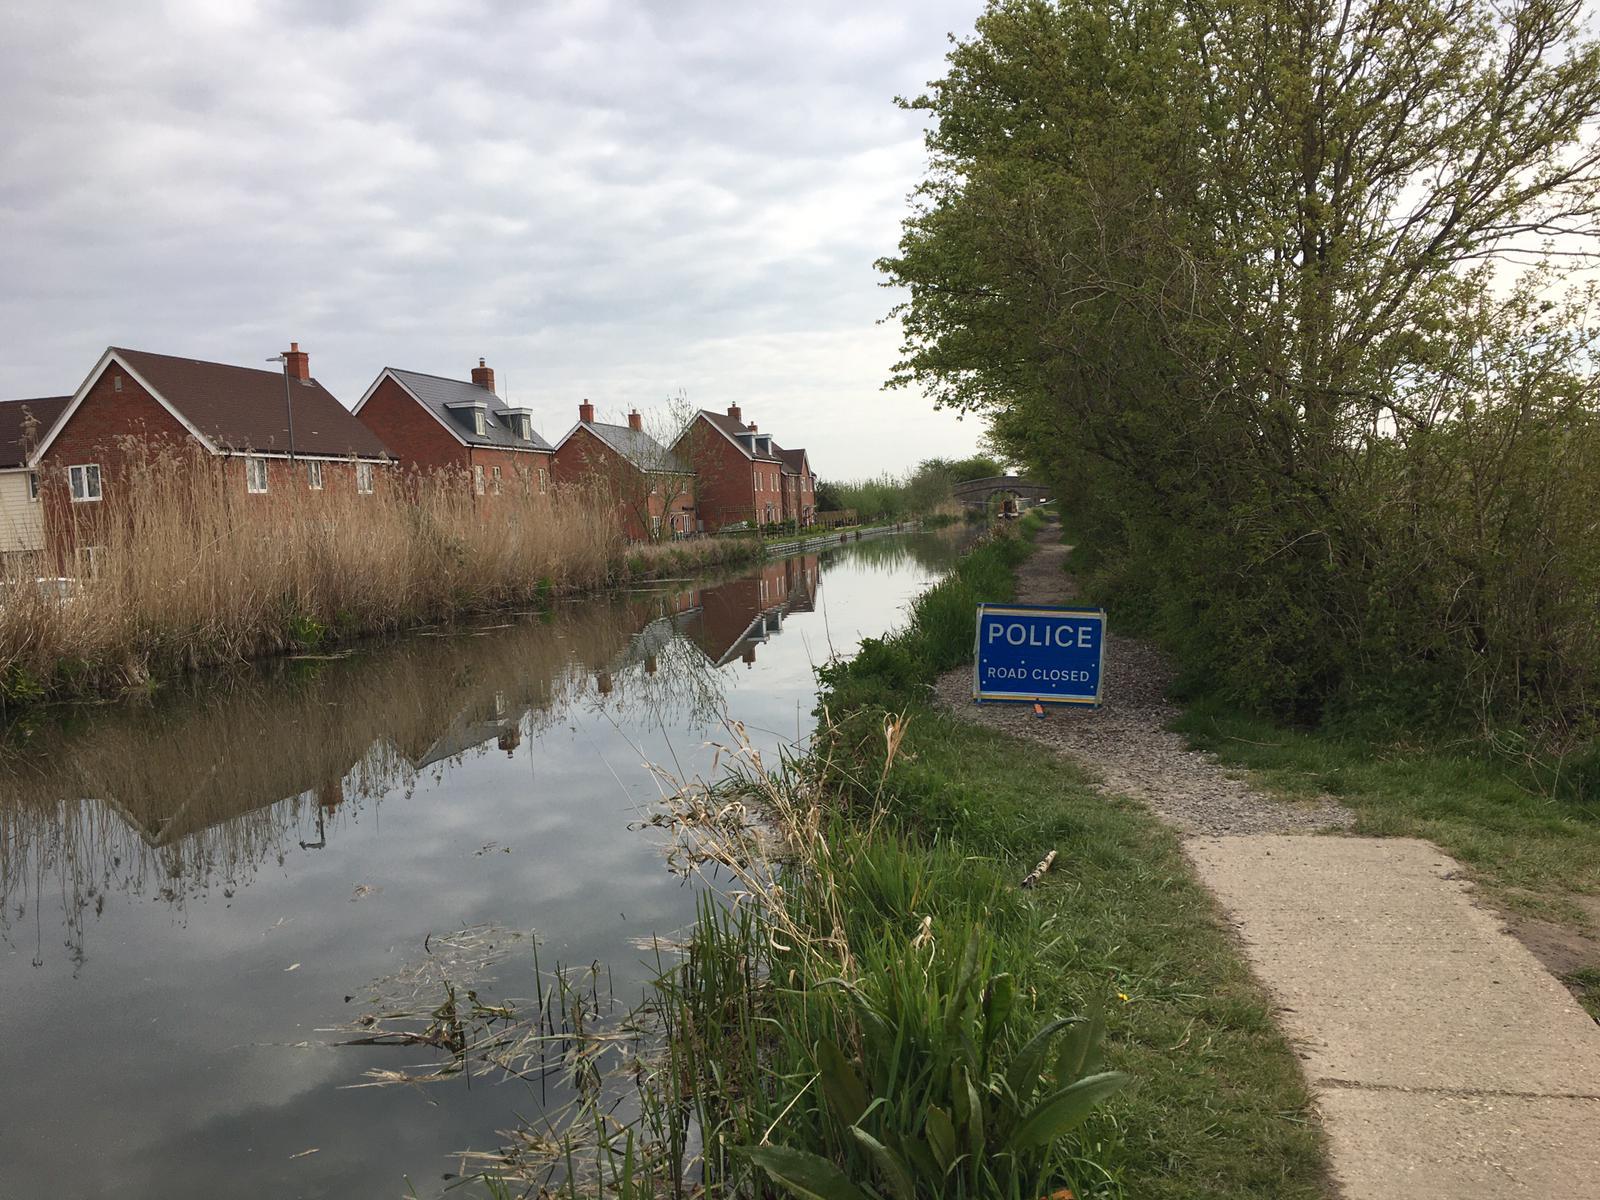 This part of the Aylesbury stretch of Grand Union Canal is closed off 